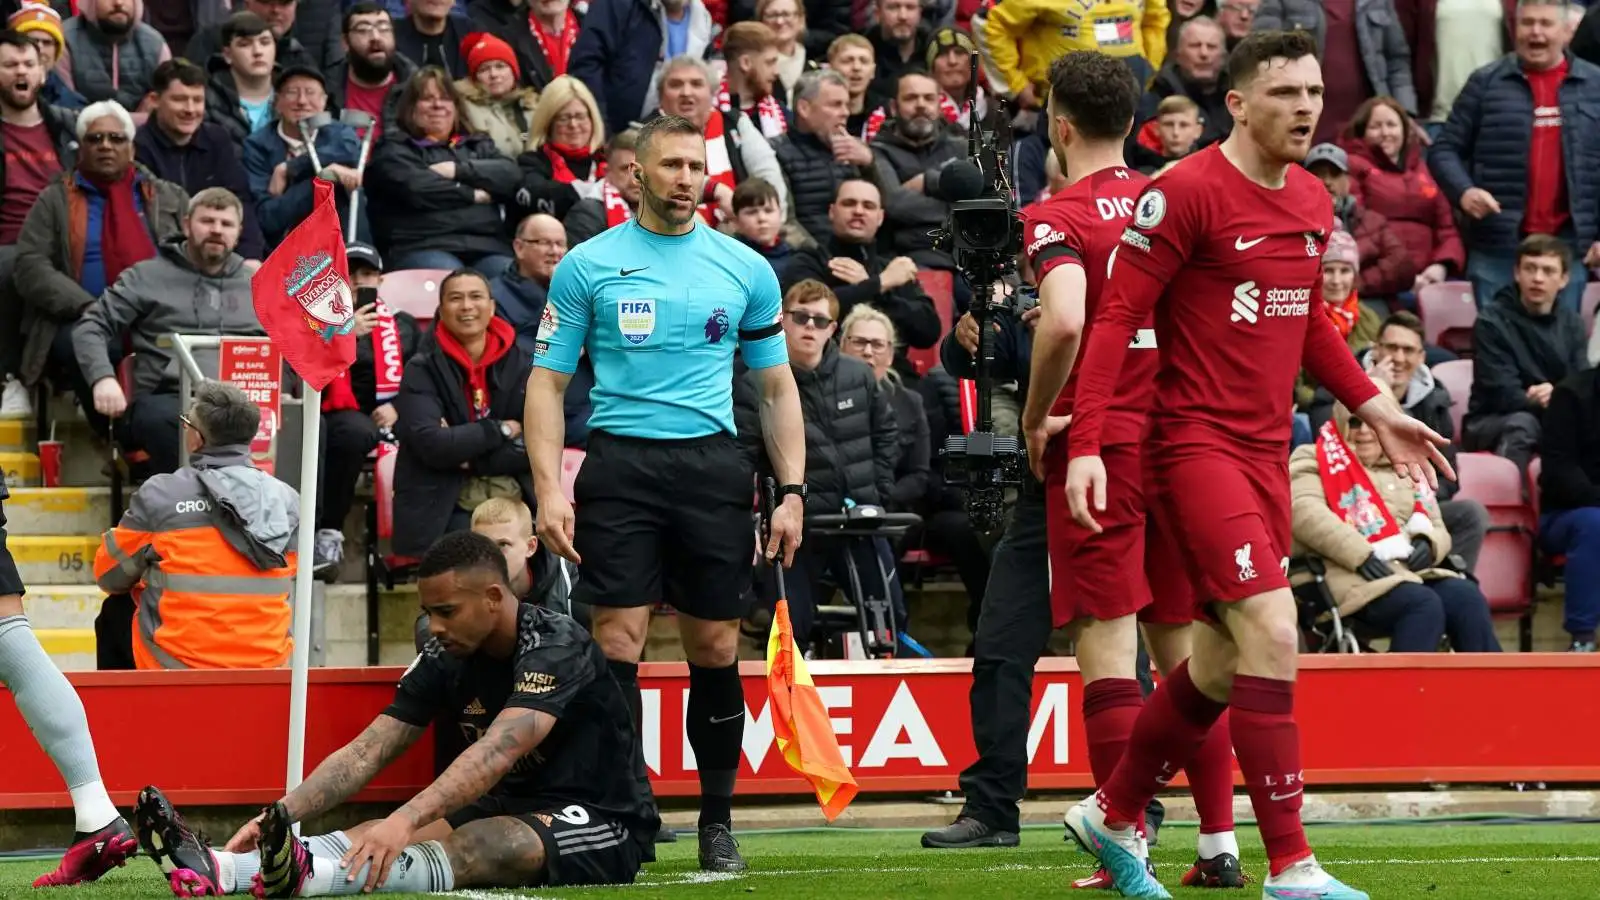 Liverpool defender Andy Robertson looks unhappy as he walks away from an incident